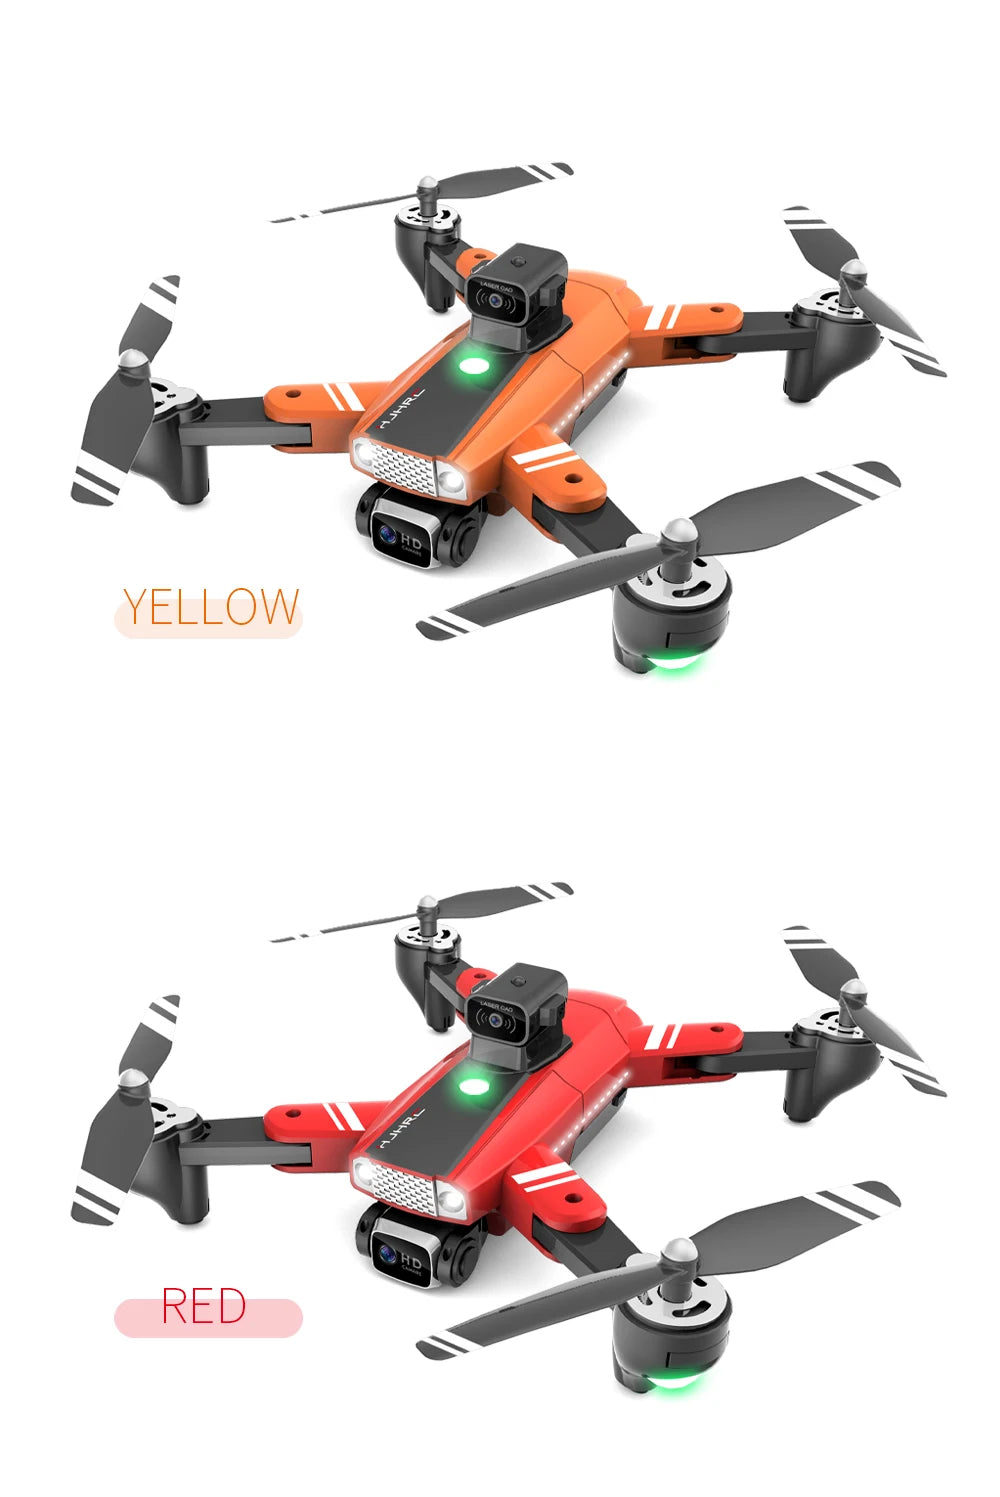 HJ69 Max Drone, wi-fi, app-controlled features : fp